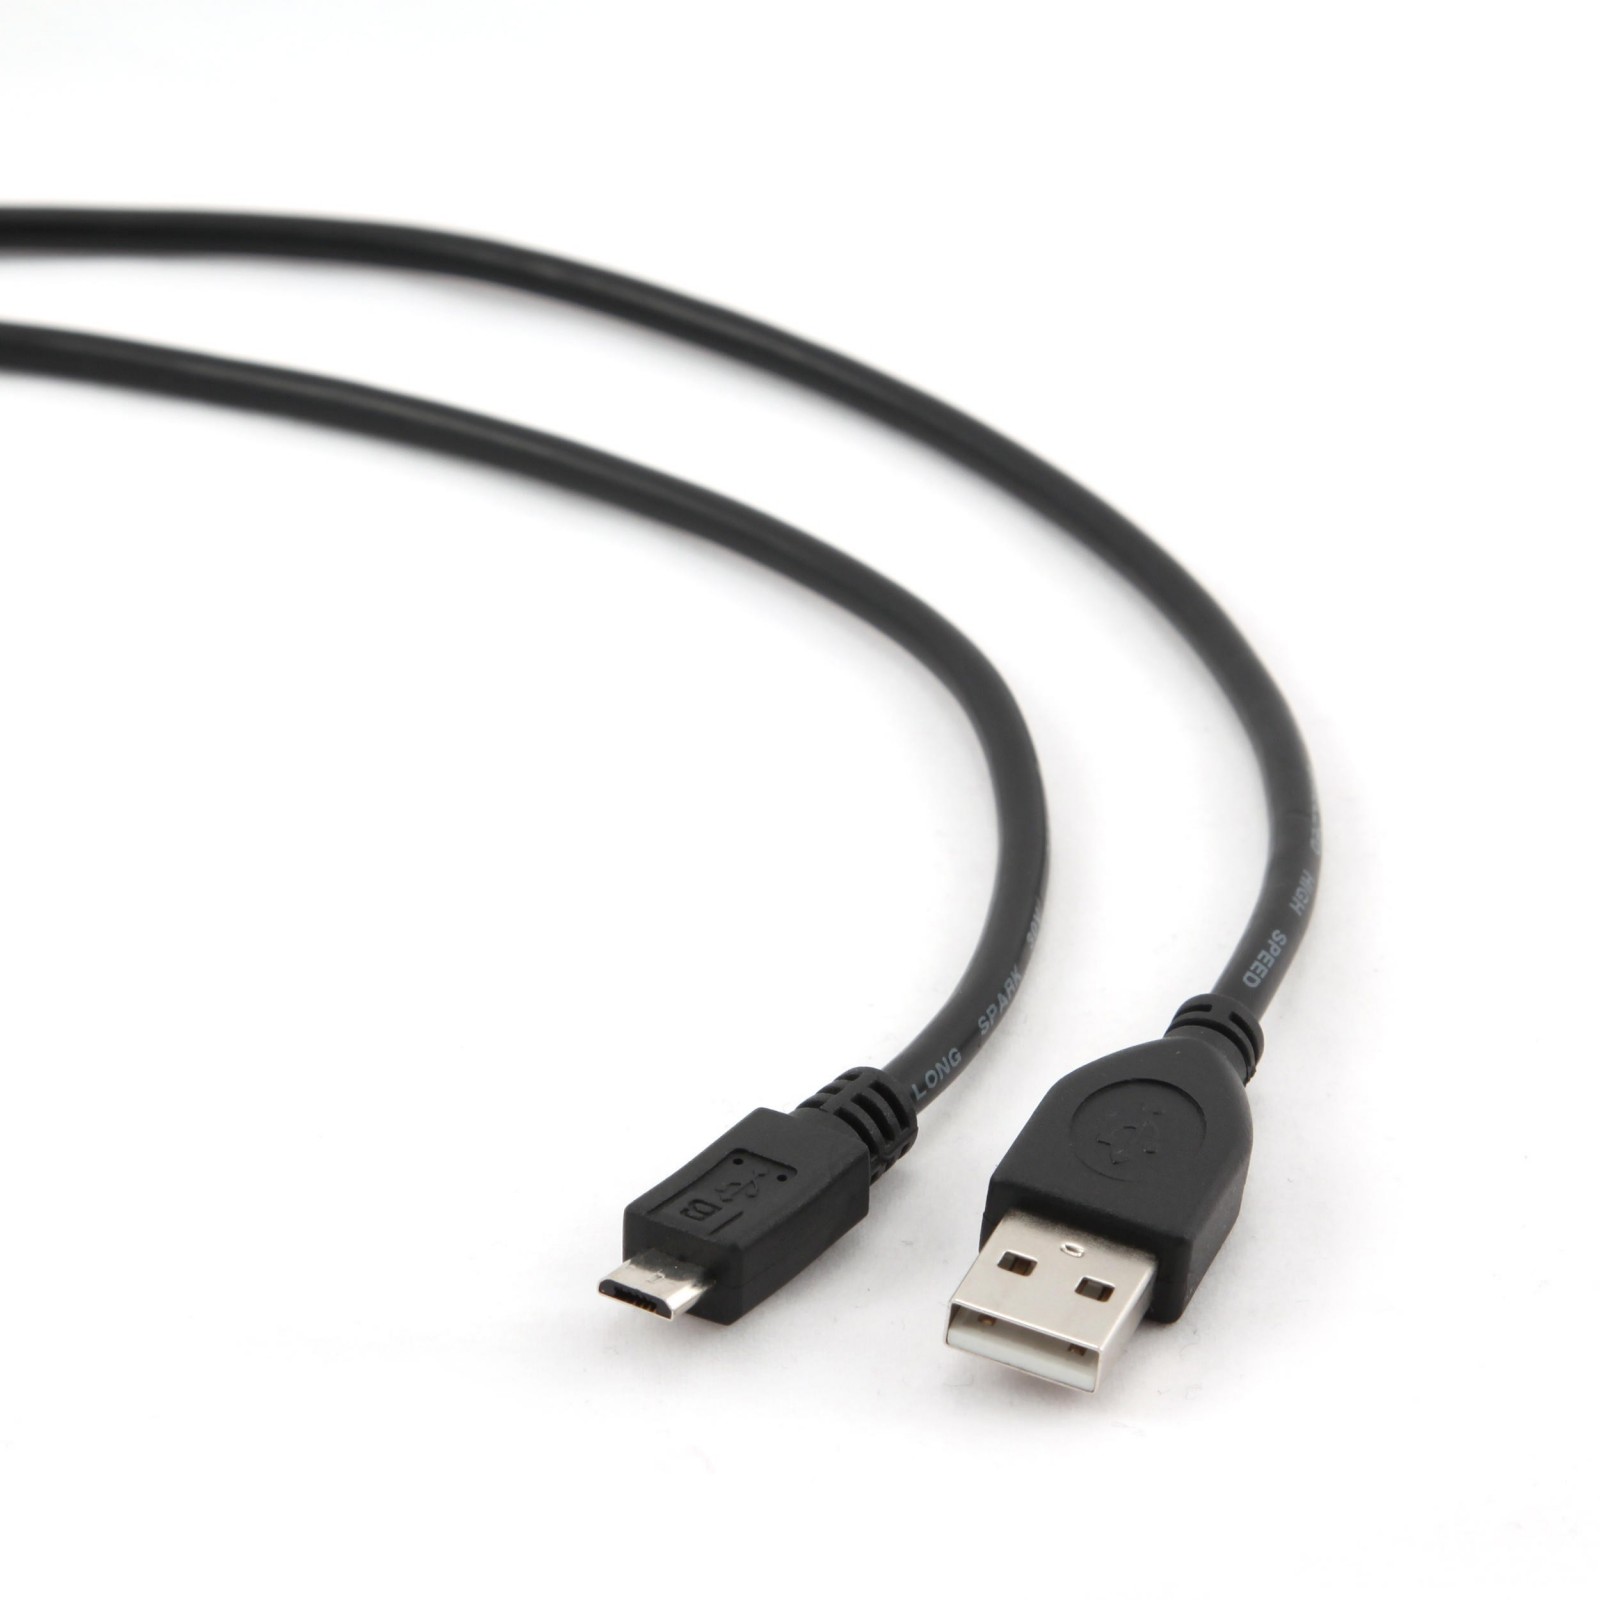 Cable Usb Gembird Usb 2.0 A Micro Usb 1M